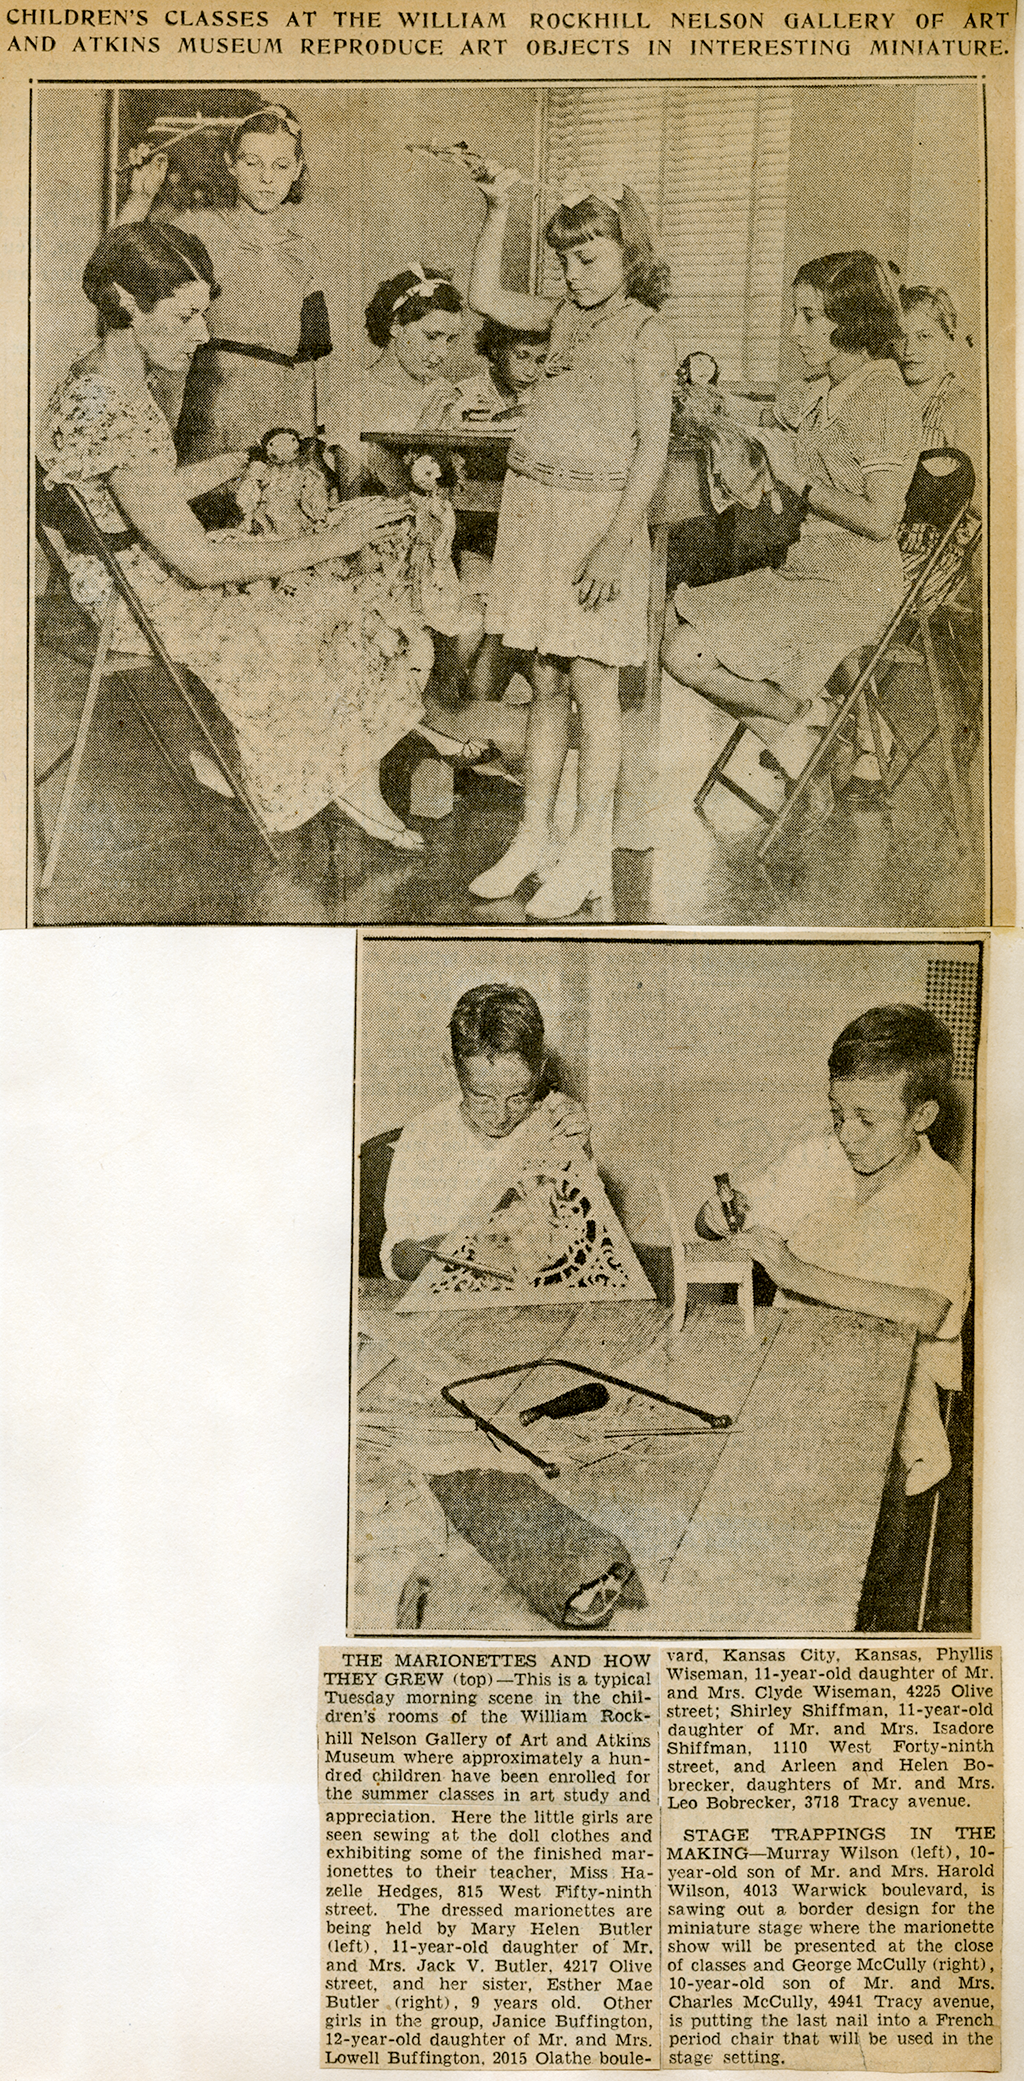 A photograph of two black and white photos pictures along with two paragraphs of text. In the top photo, there is a group of young girls sitting around and a table. They play with dolls and other toys. The photograph below depicts two young boys building a small chair and other wooden objects.